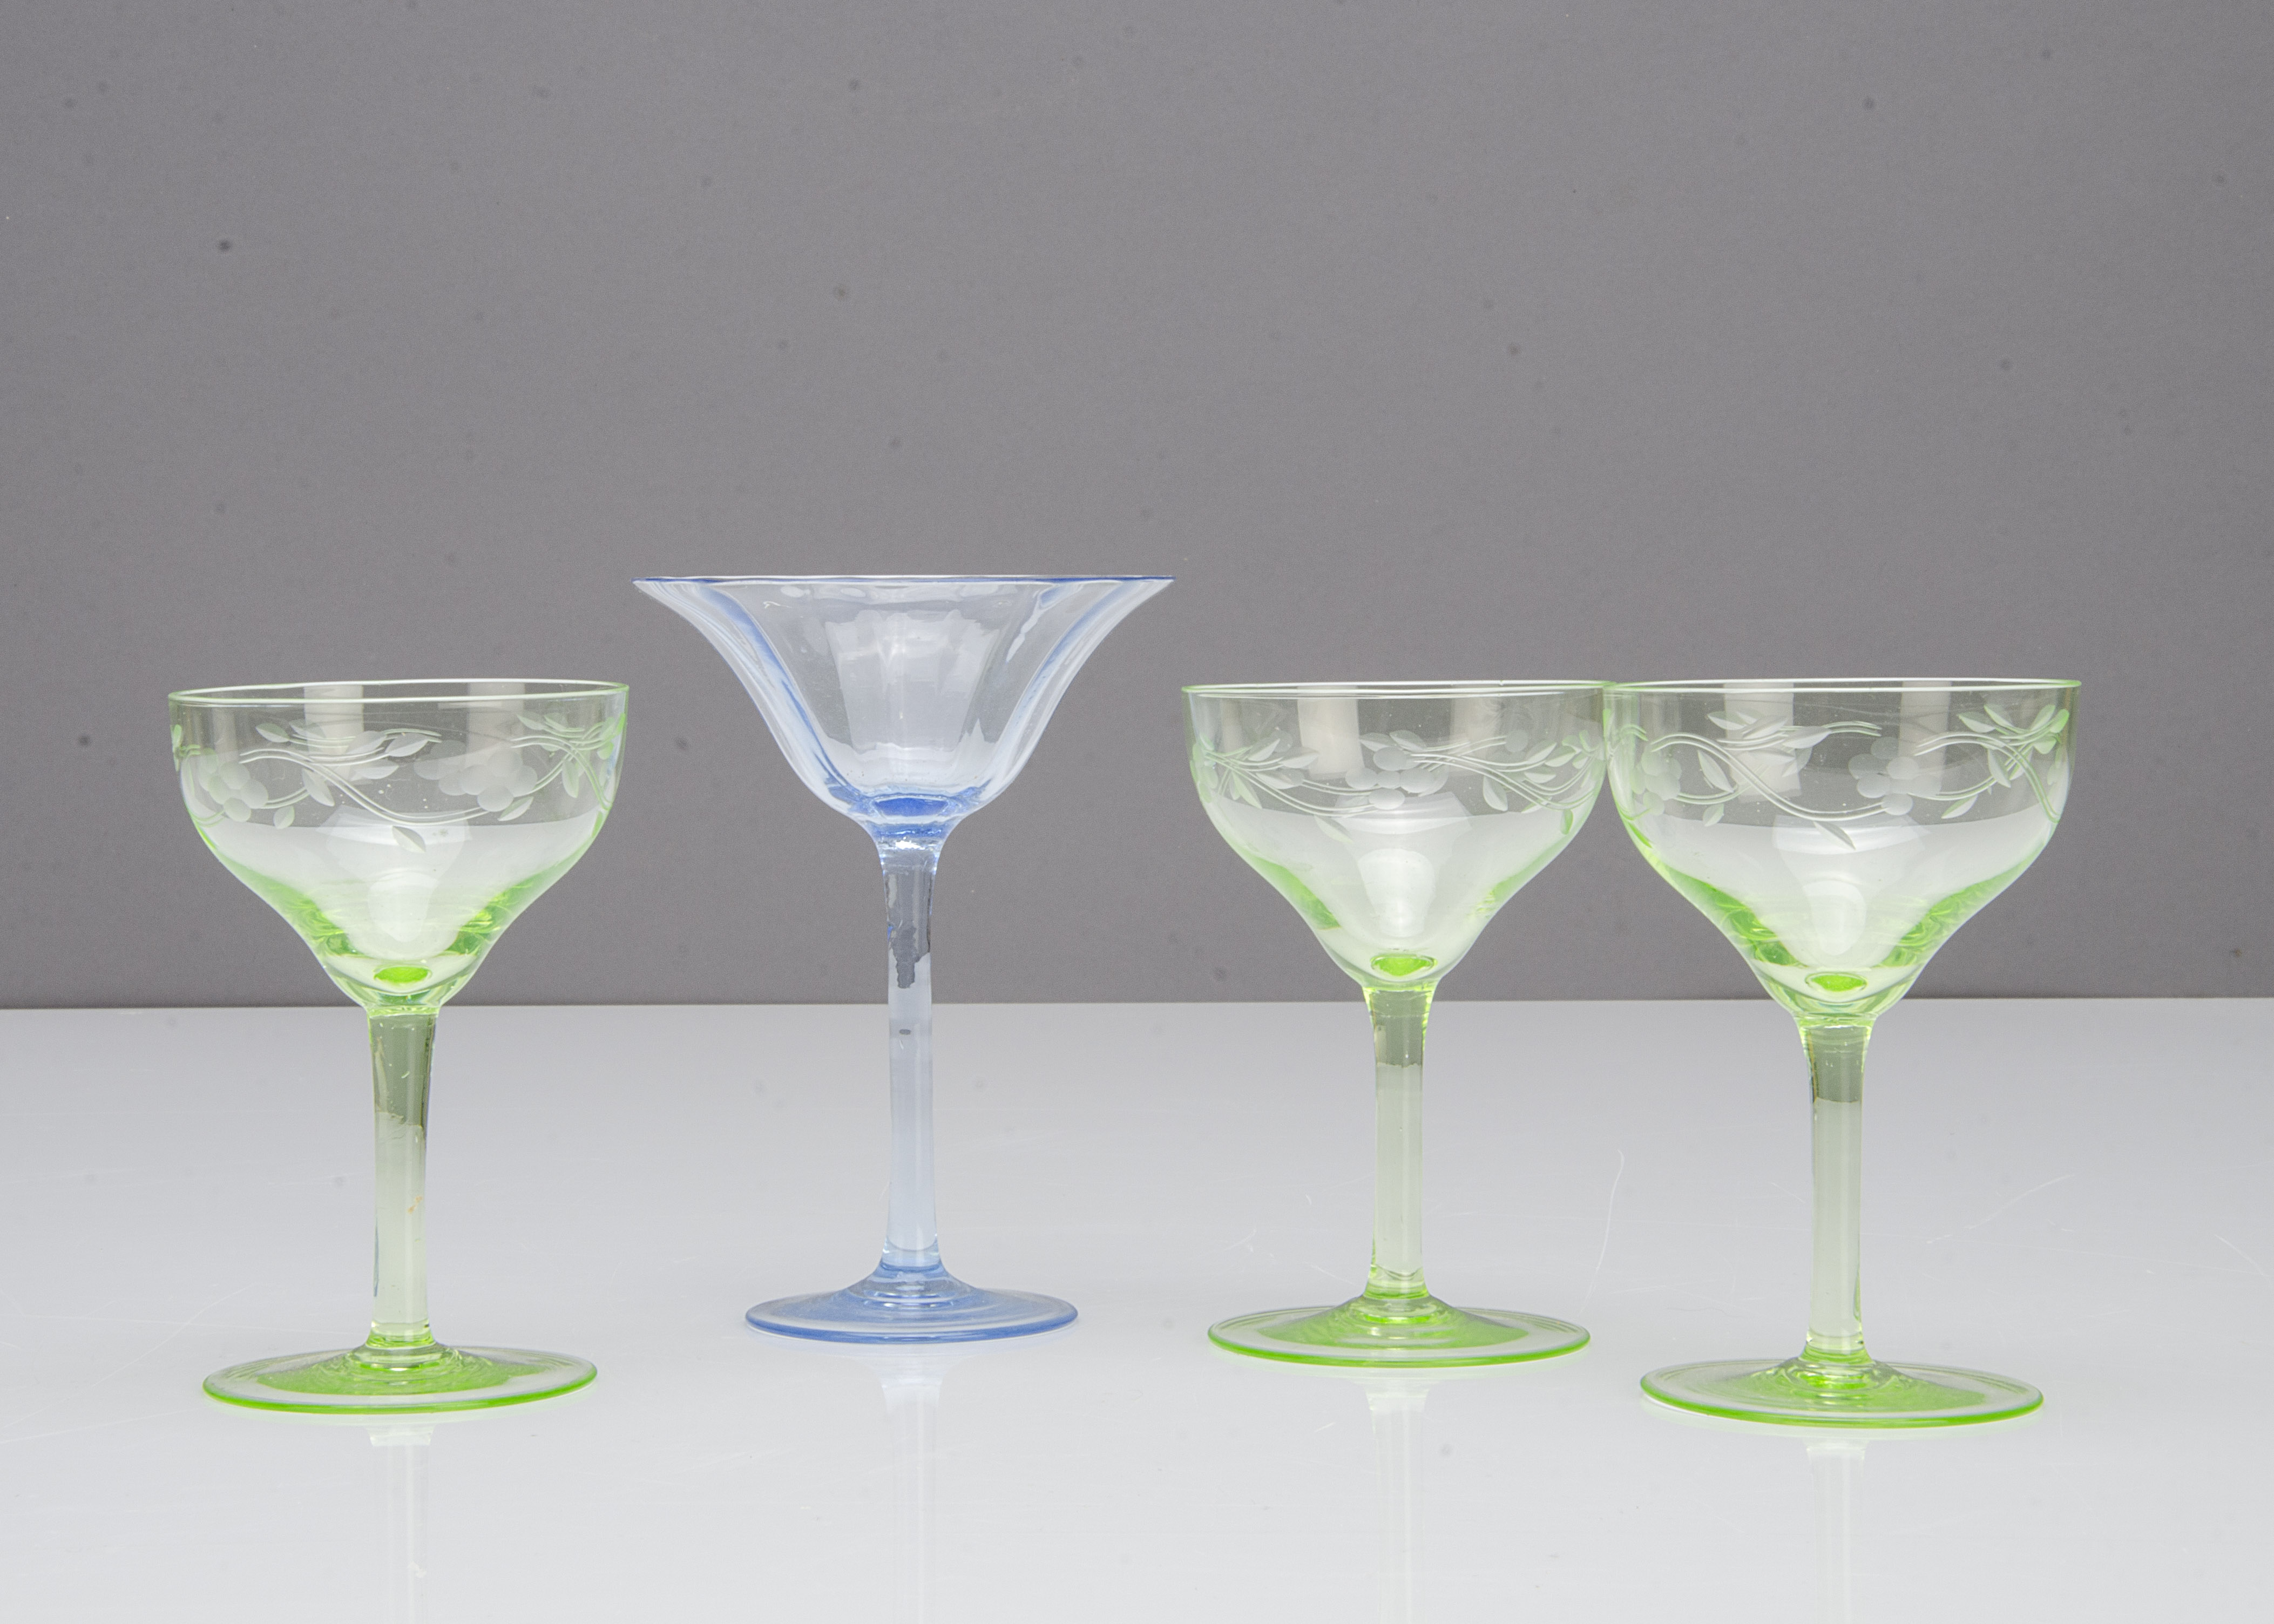 A set of three green engraved Art Nouveau liquor glasses, 10cm high together with a blue optic - Image 2 of 2